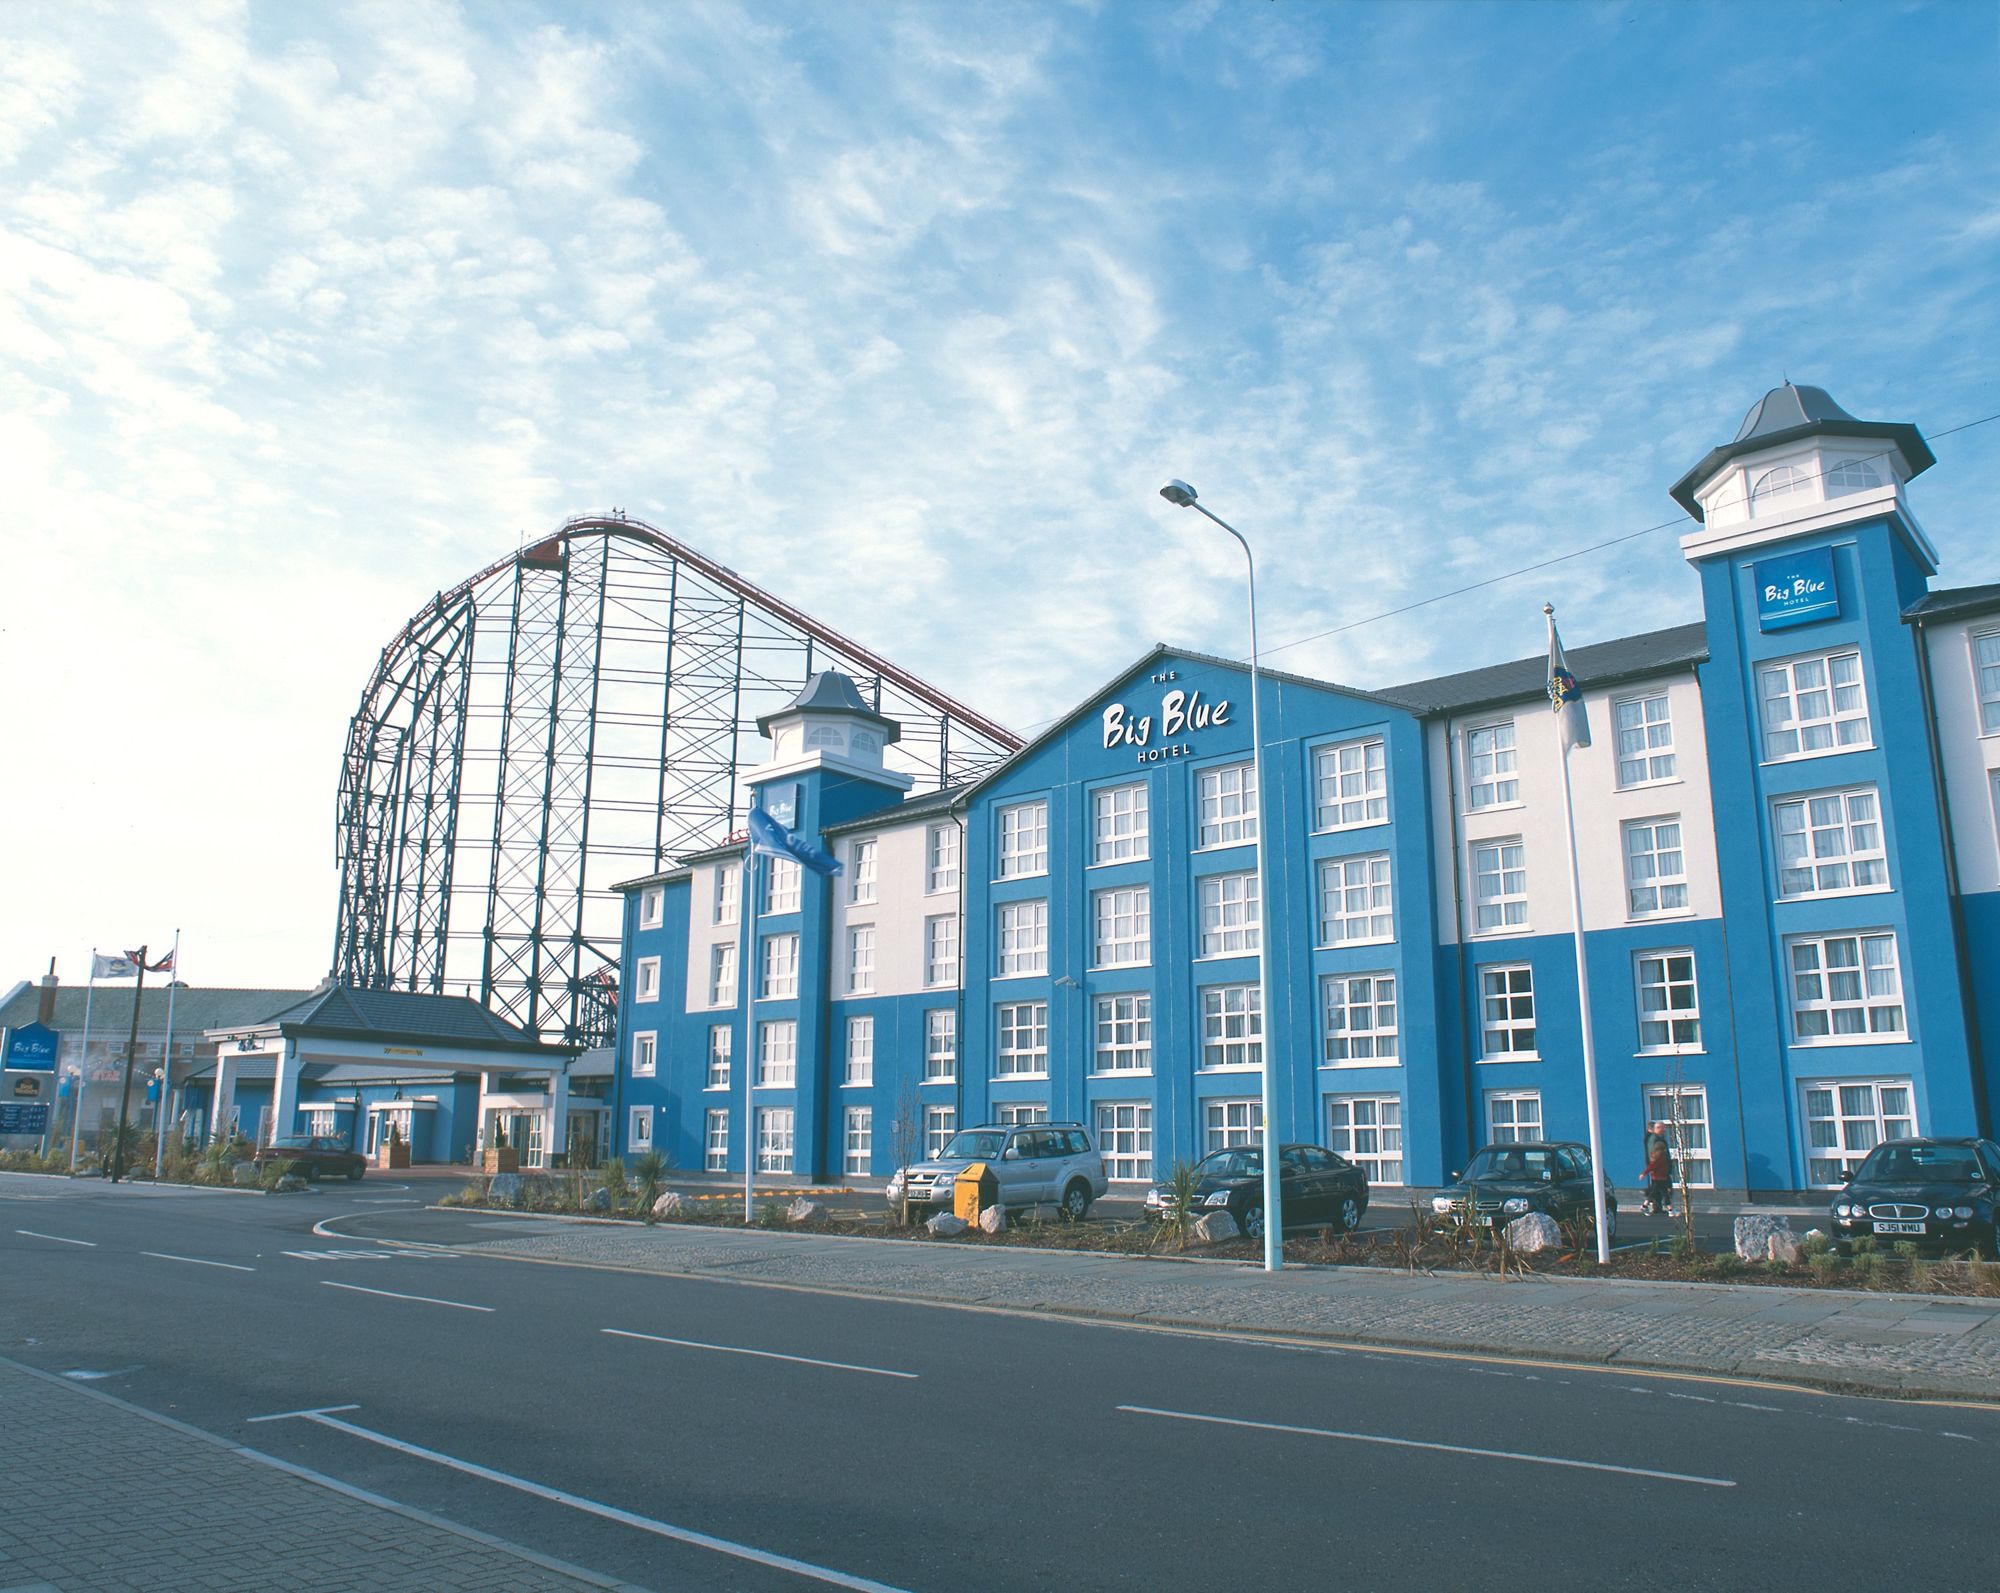 Hotels in Blackpool holidays at Cool Places